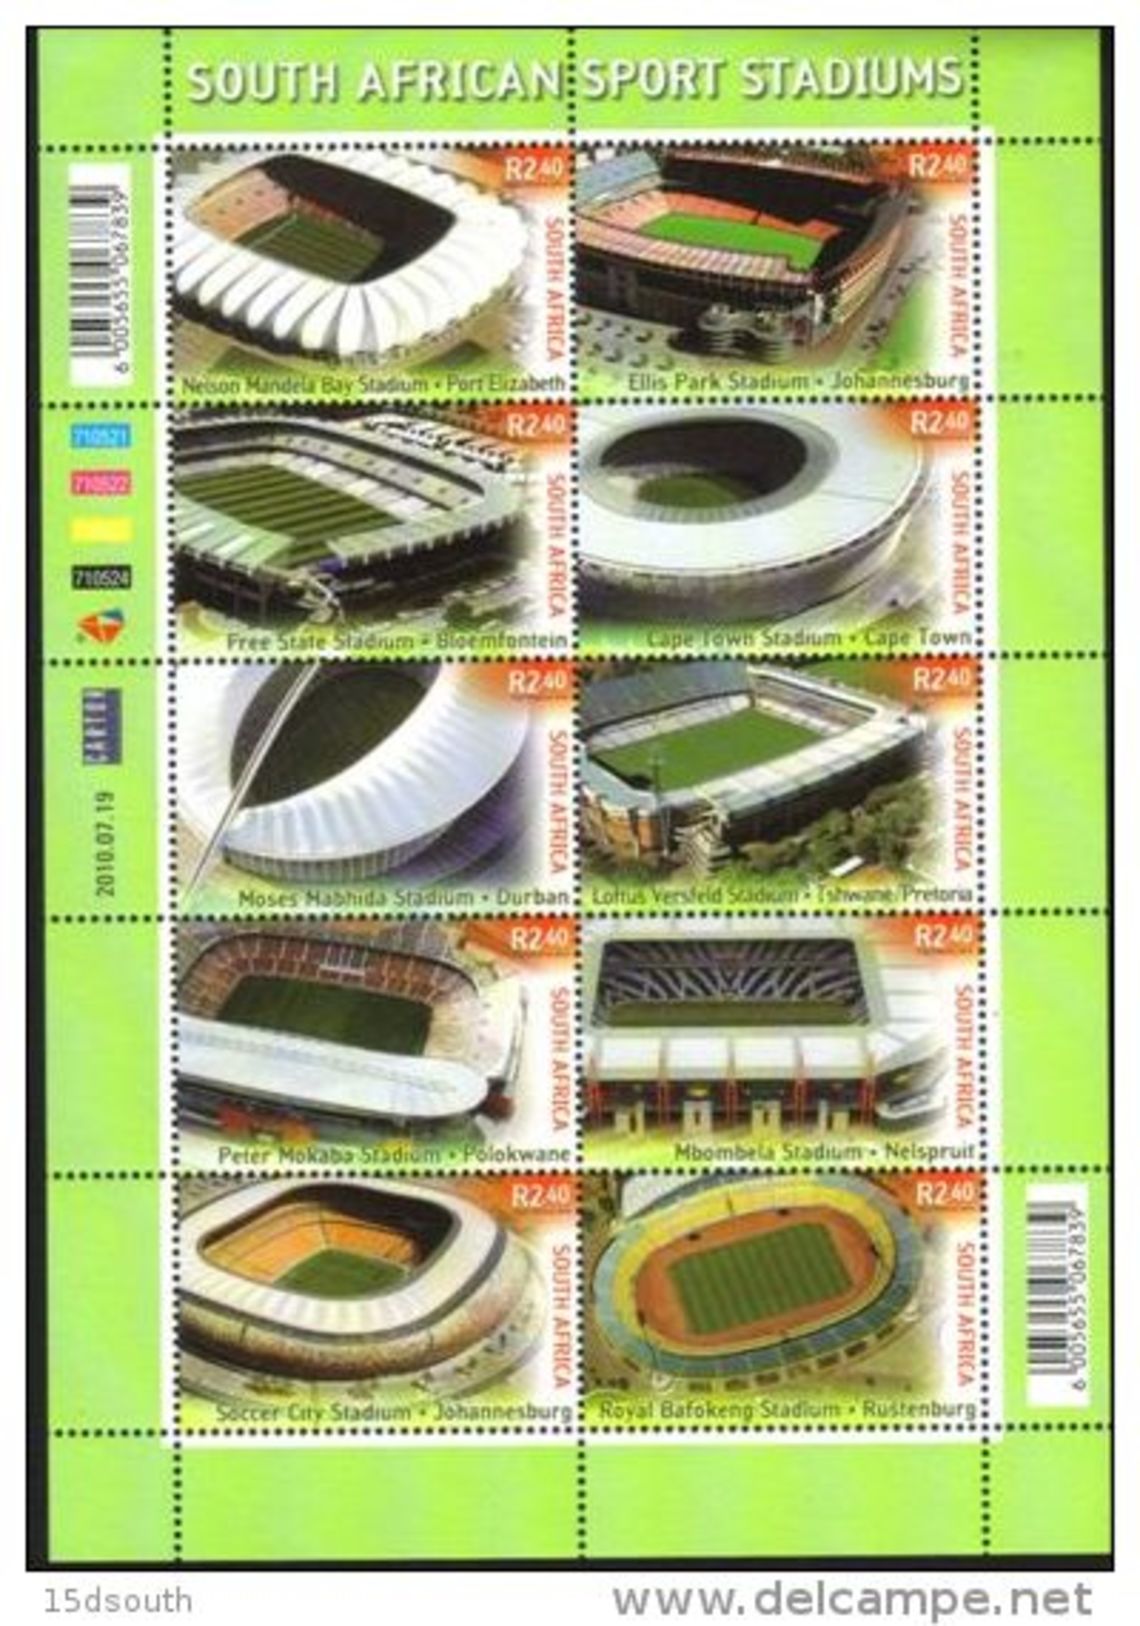 South Africa - 2010 Sports Stadiums Sheet (**) # SG 1797a - 2010 – South Africa